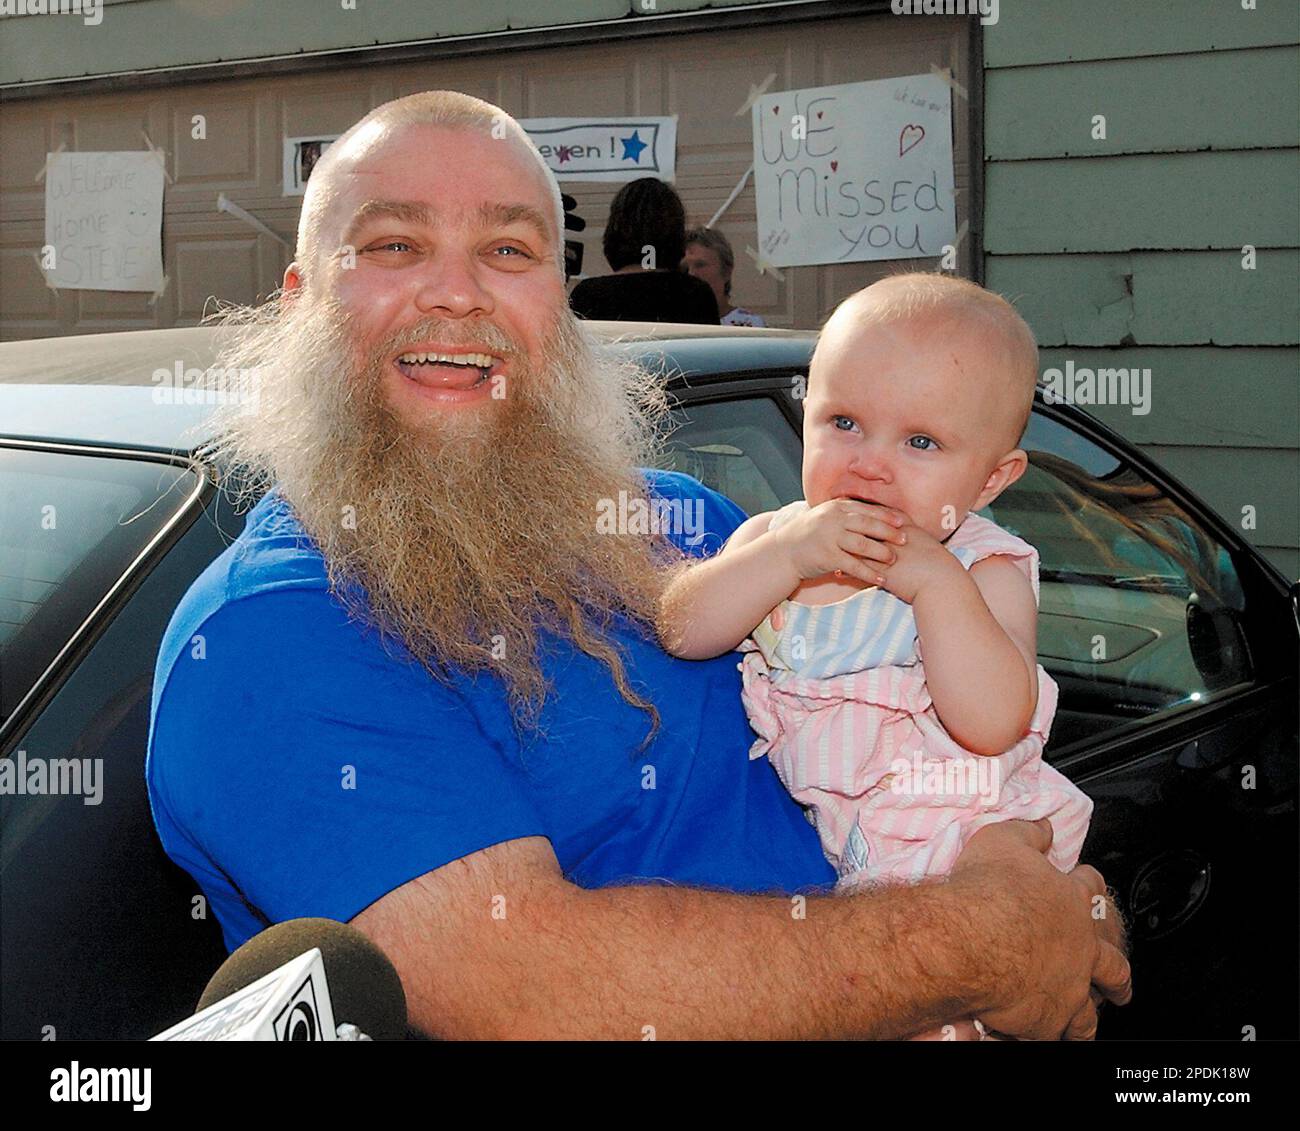 Steven Avery holds his great niece, 8-month-old, Danielle Avery, who he has never met, as the media interviews him on his arrival home to rural Two Rivers, Wis., after his release from prison Sept. 11, 2003. Avery, a man who spent 18 years in prison for a rape he did not commit, intends to seek millions of dollars in damages in a lawsuit that contends his civil and constitutional rights were violated, his attorney said Thursday, Dec. 18, 2003. The development came hours after Attorney General Peg Lautenschlager concluded that no criminal charges or ethics violations should be brought against a Stock Photo